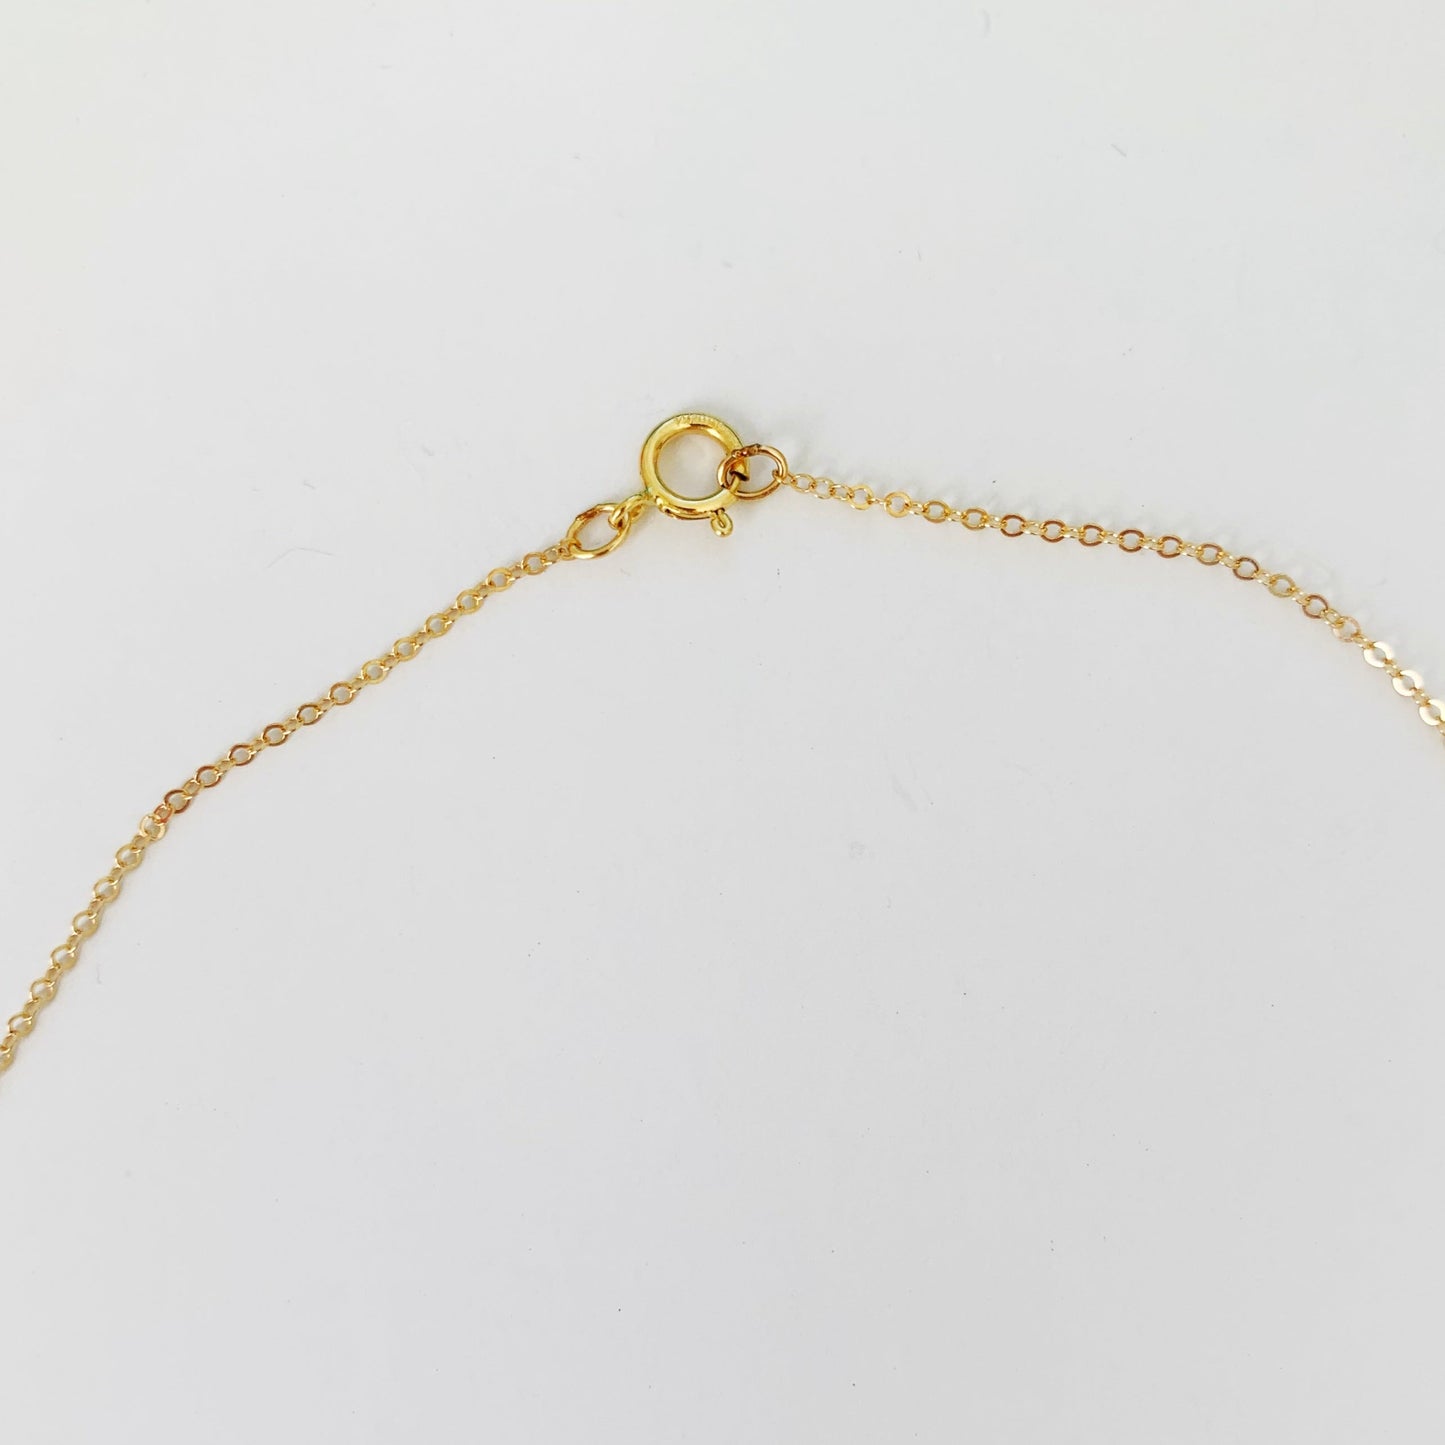 Newport Gala necklace in gold filled has a spring ring clasp as shown here on a white surface